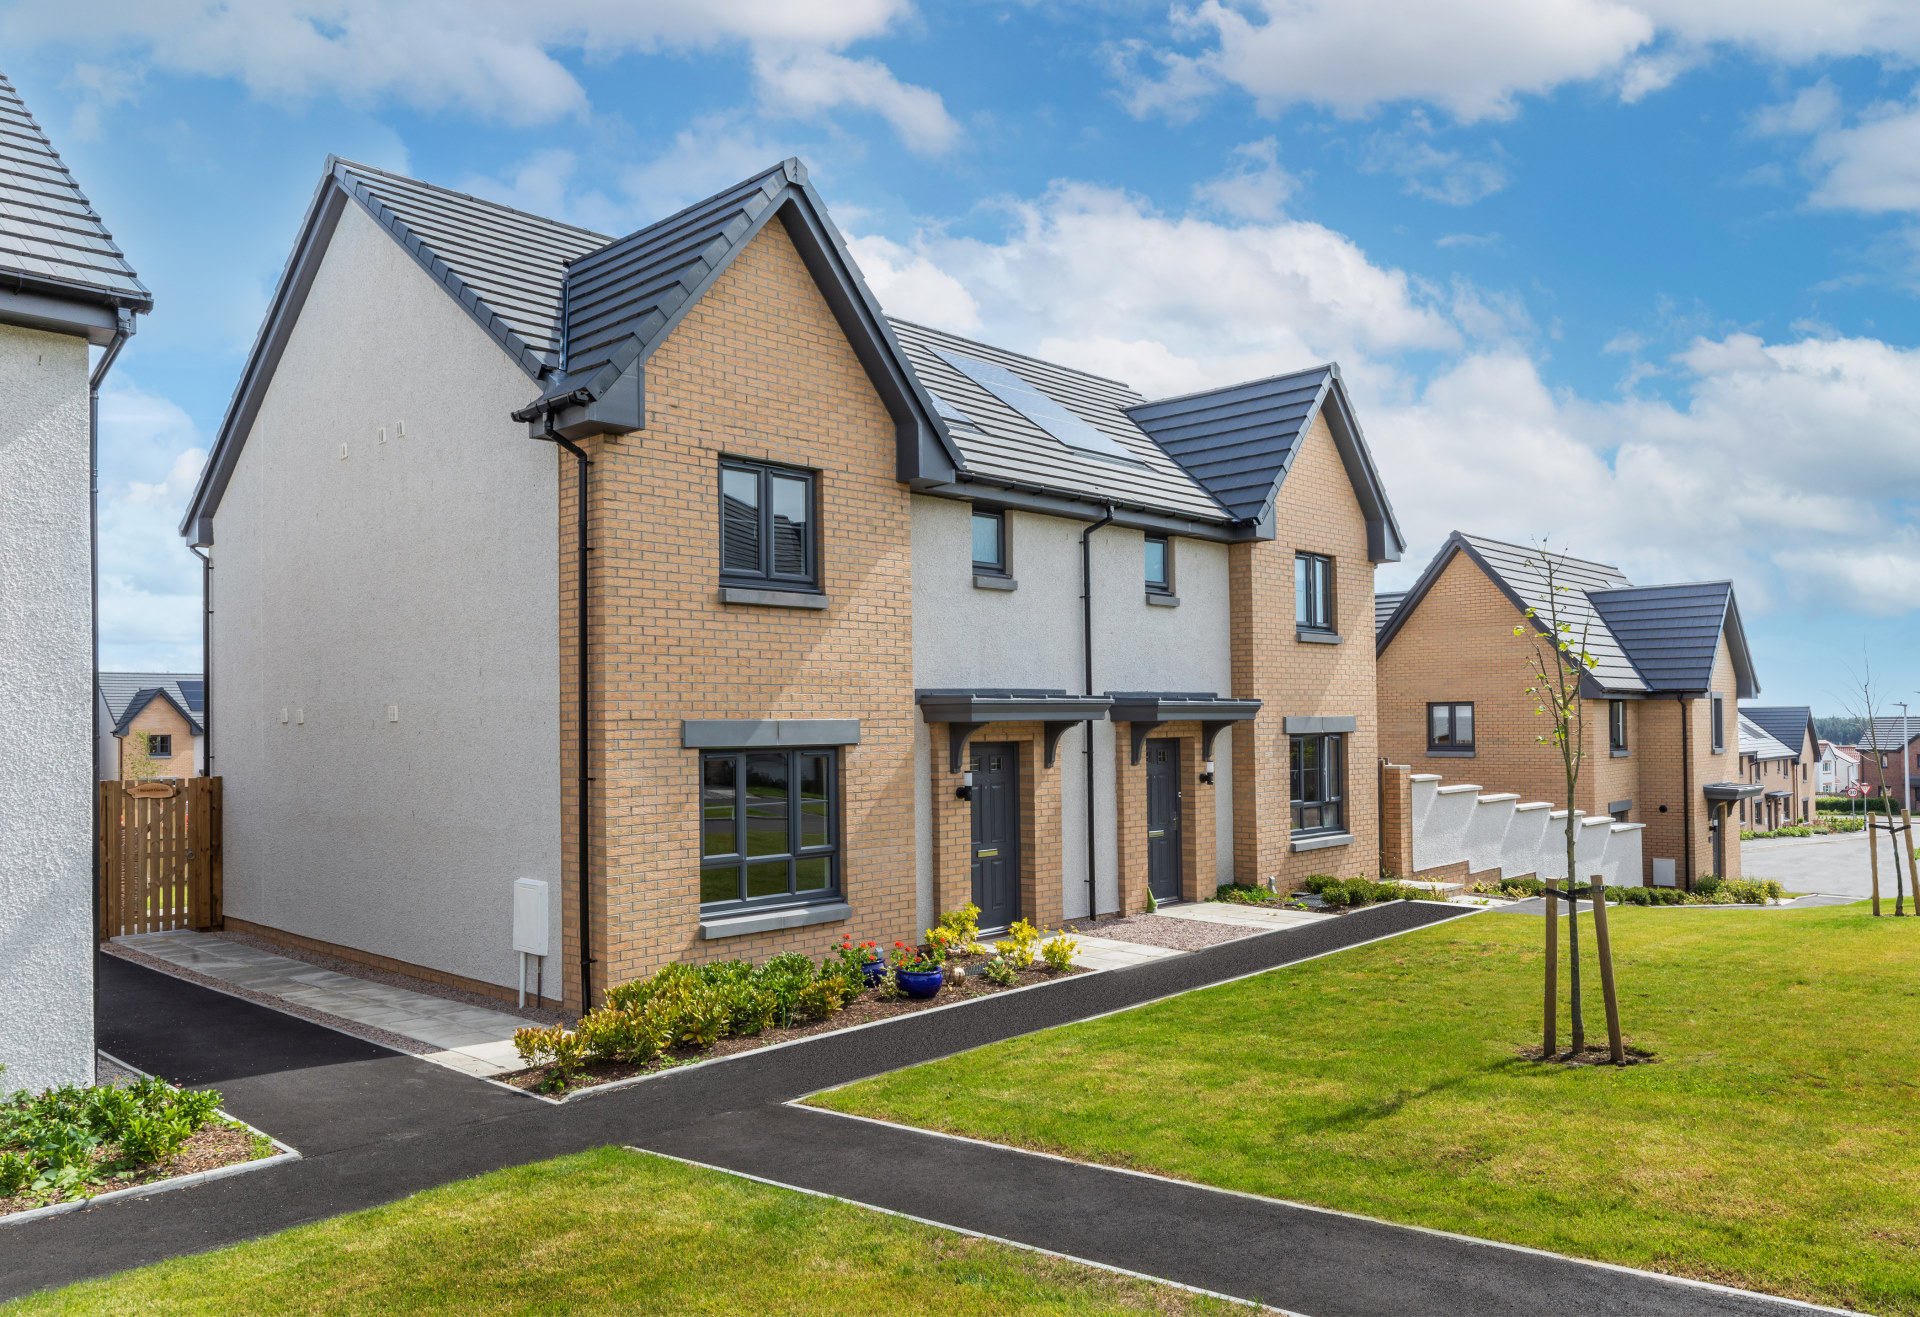 Barratt to create more than 2,300 new homes across 14 new sites